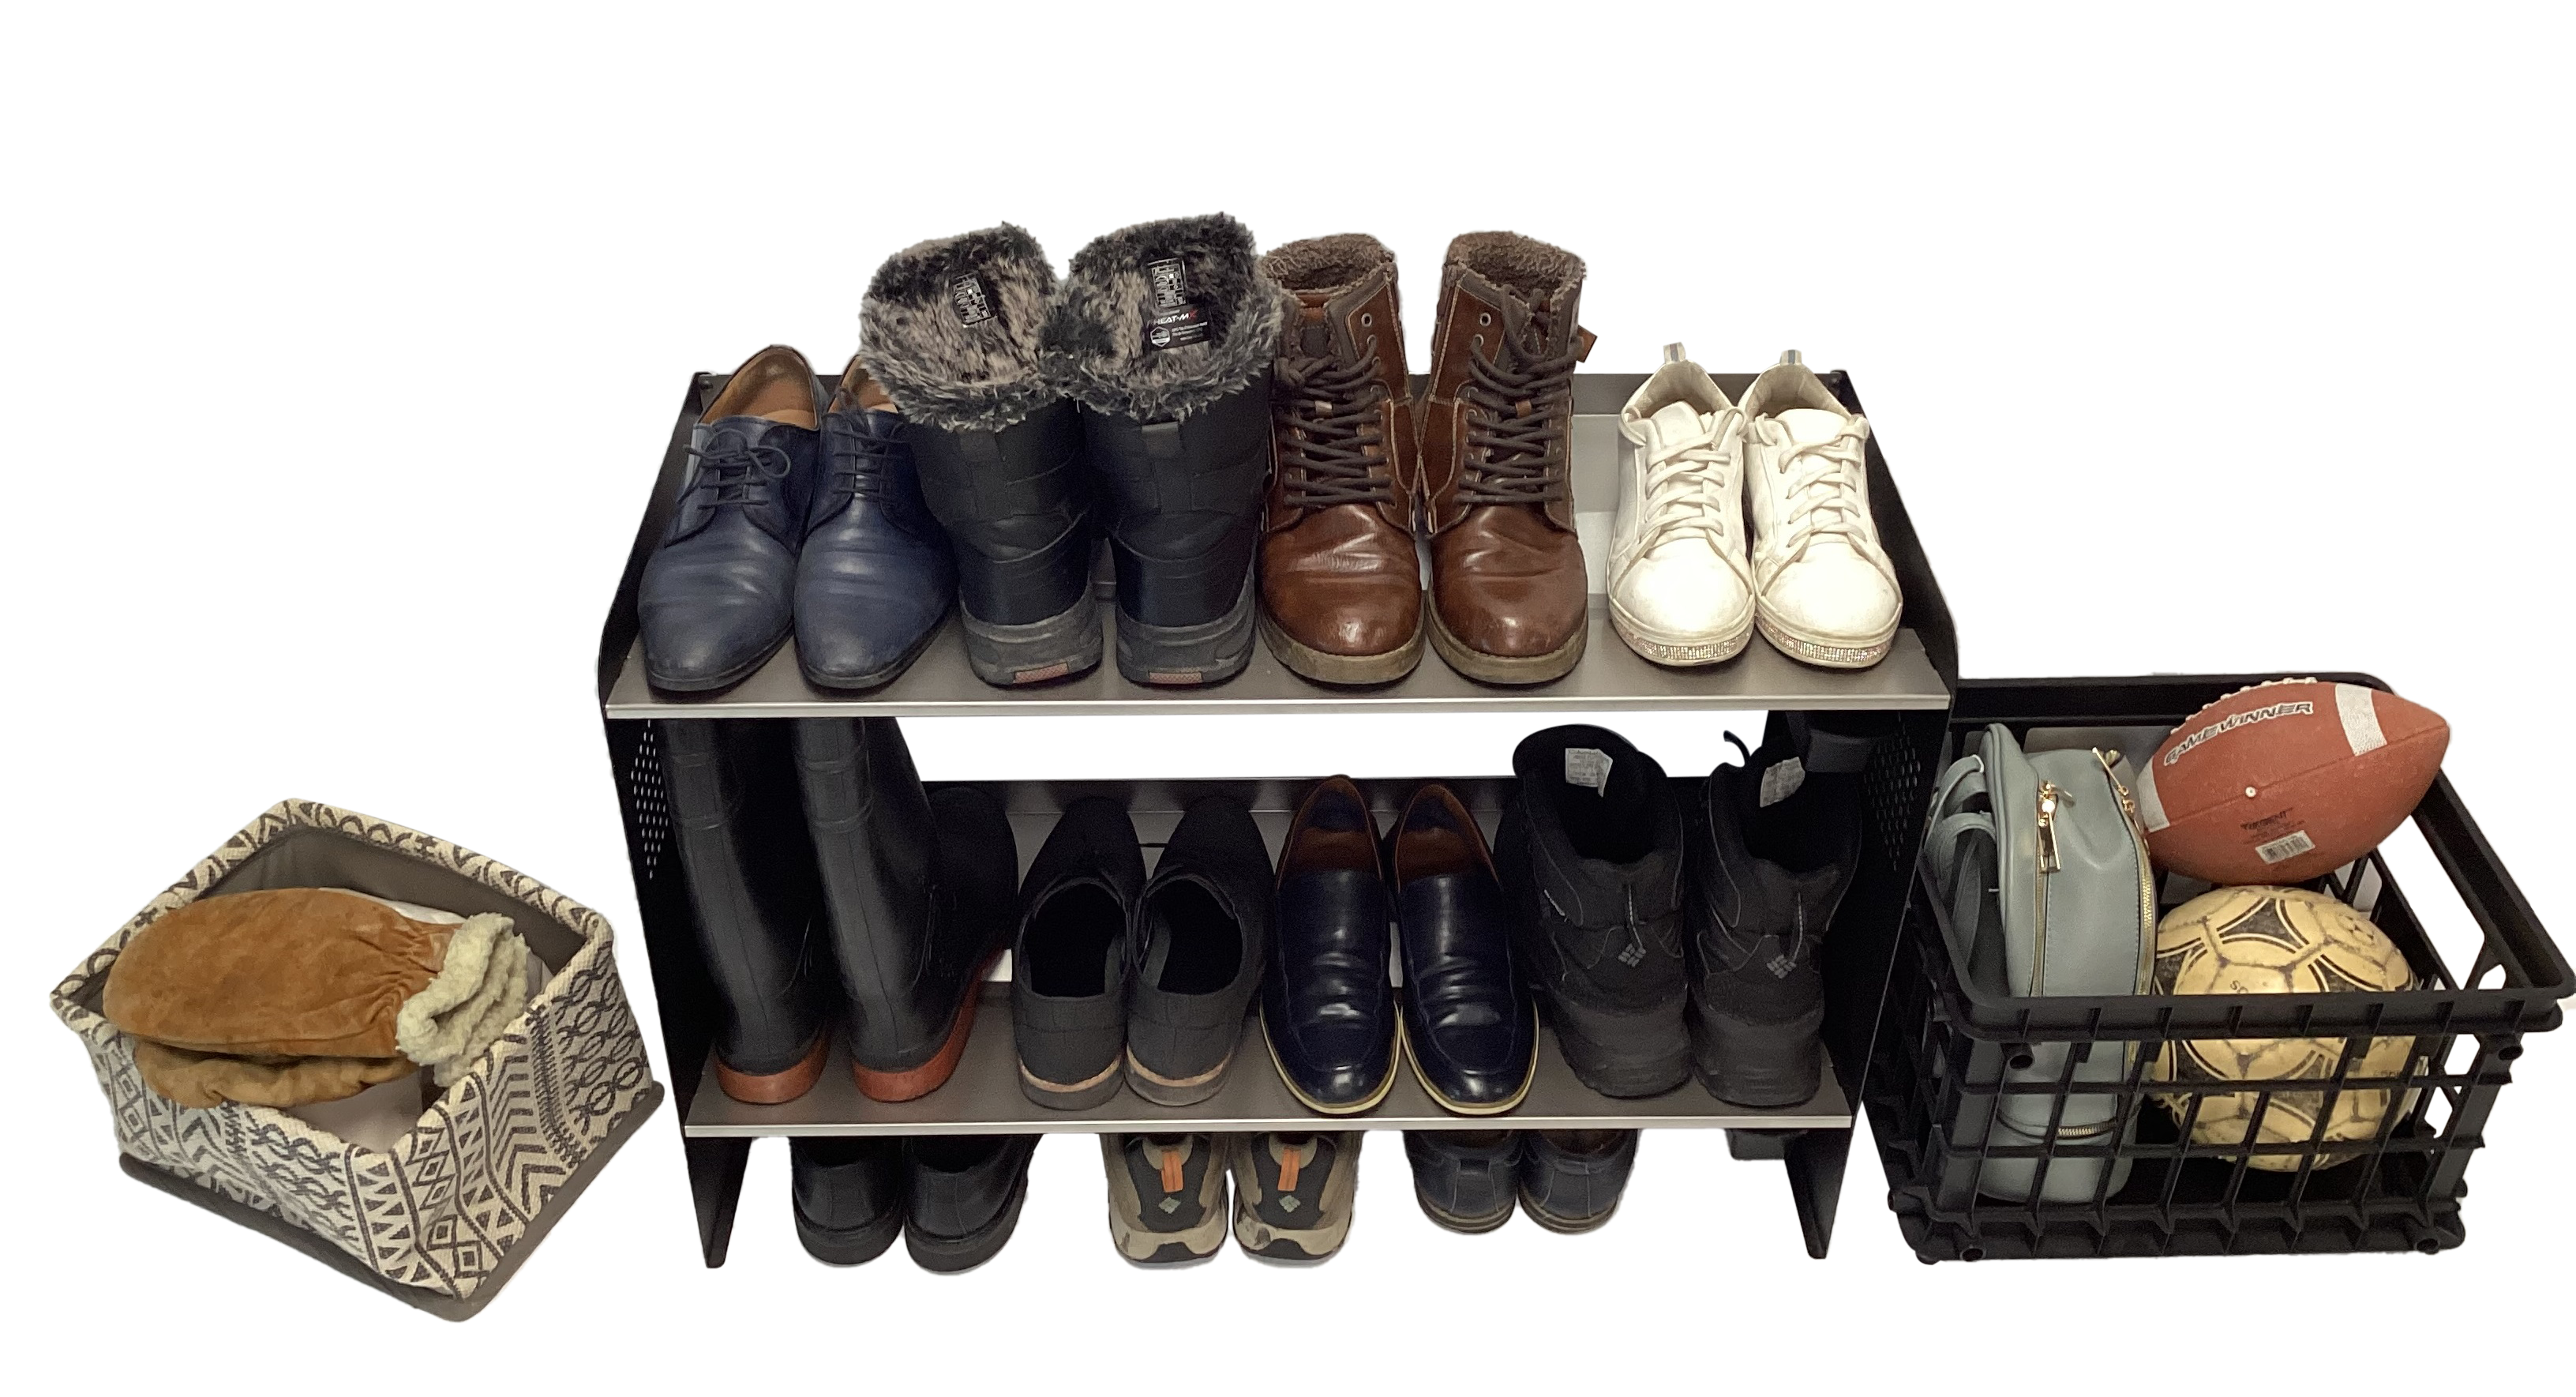 SIGNATURE CLASSY CHIC METAL BOOT RACK | 2 TIERS | 33" WIDE | 8 PAIRS